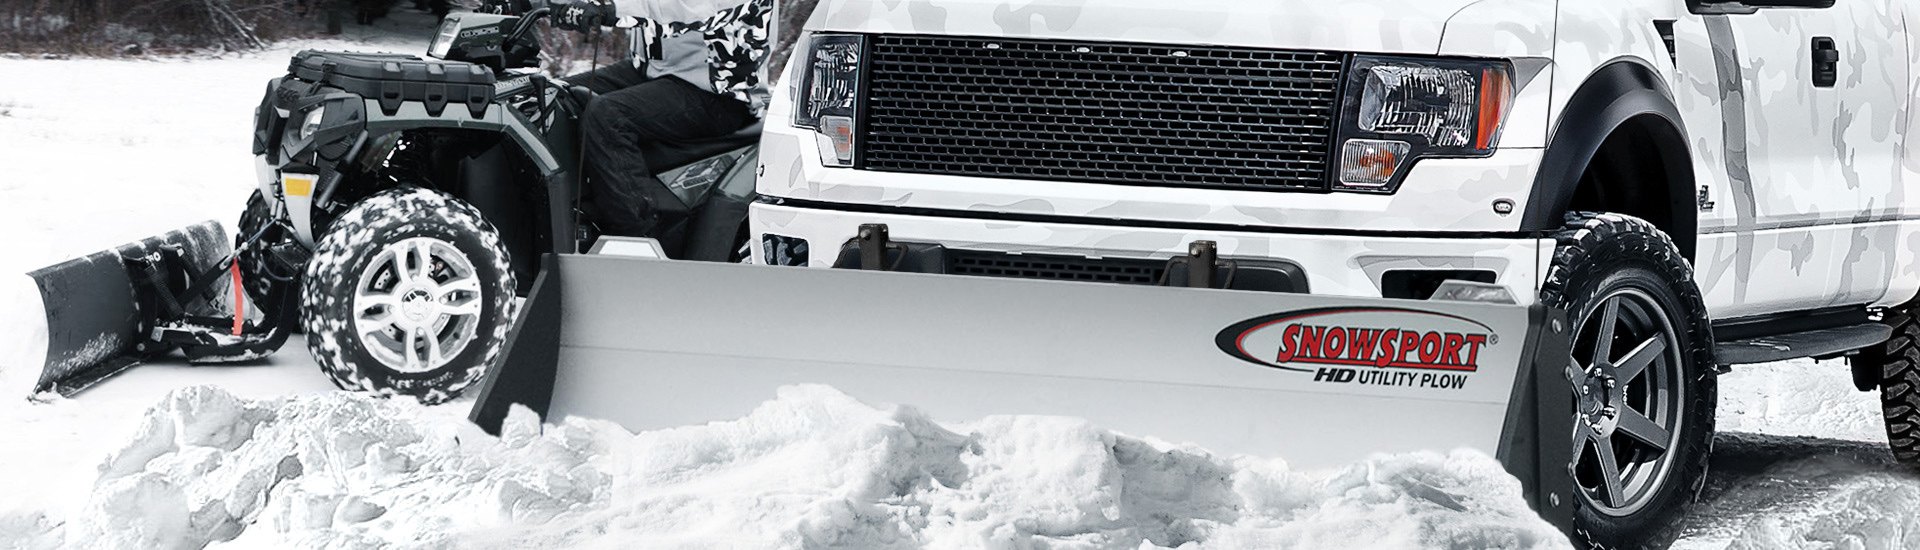 An Affordable Snow Plow For Those Who Need It